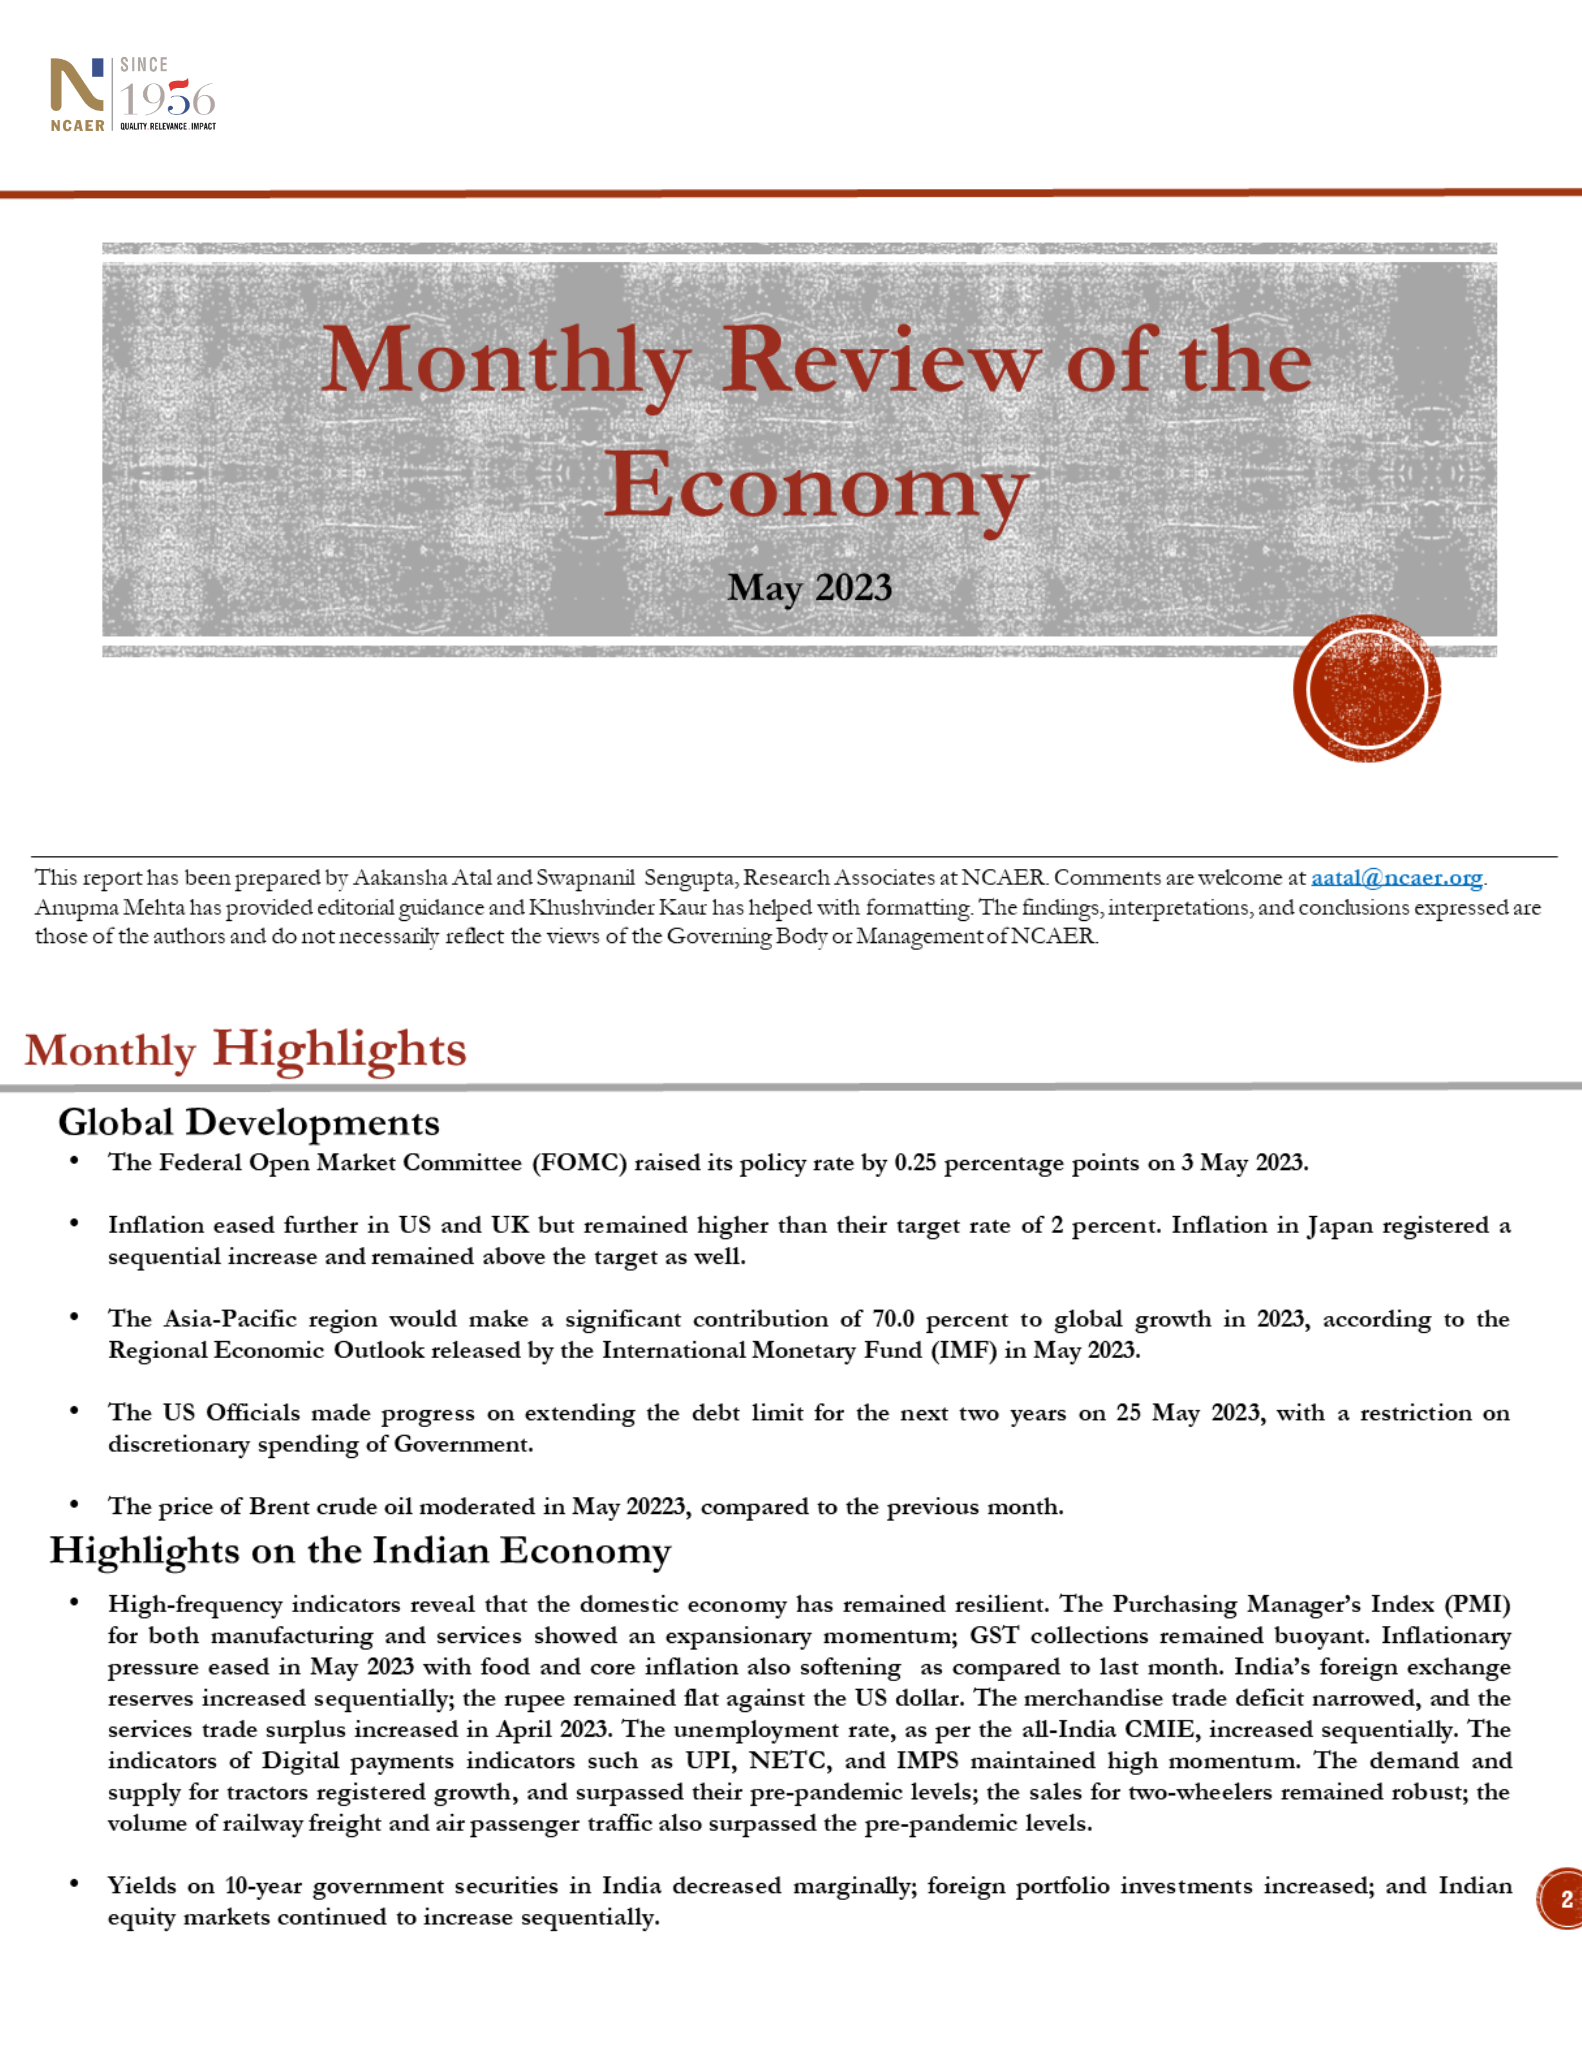 Monthly Review of the Economy – May 2023